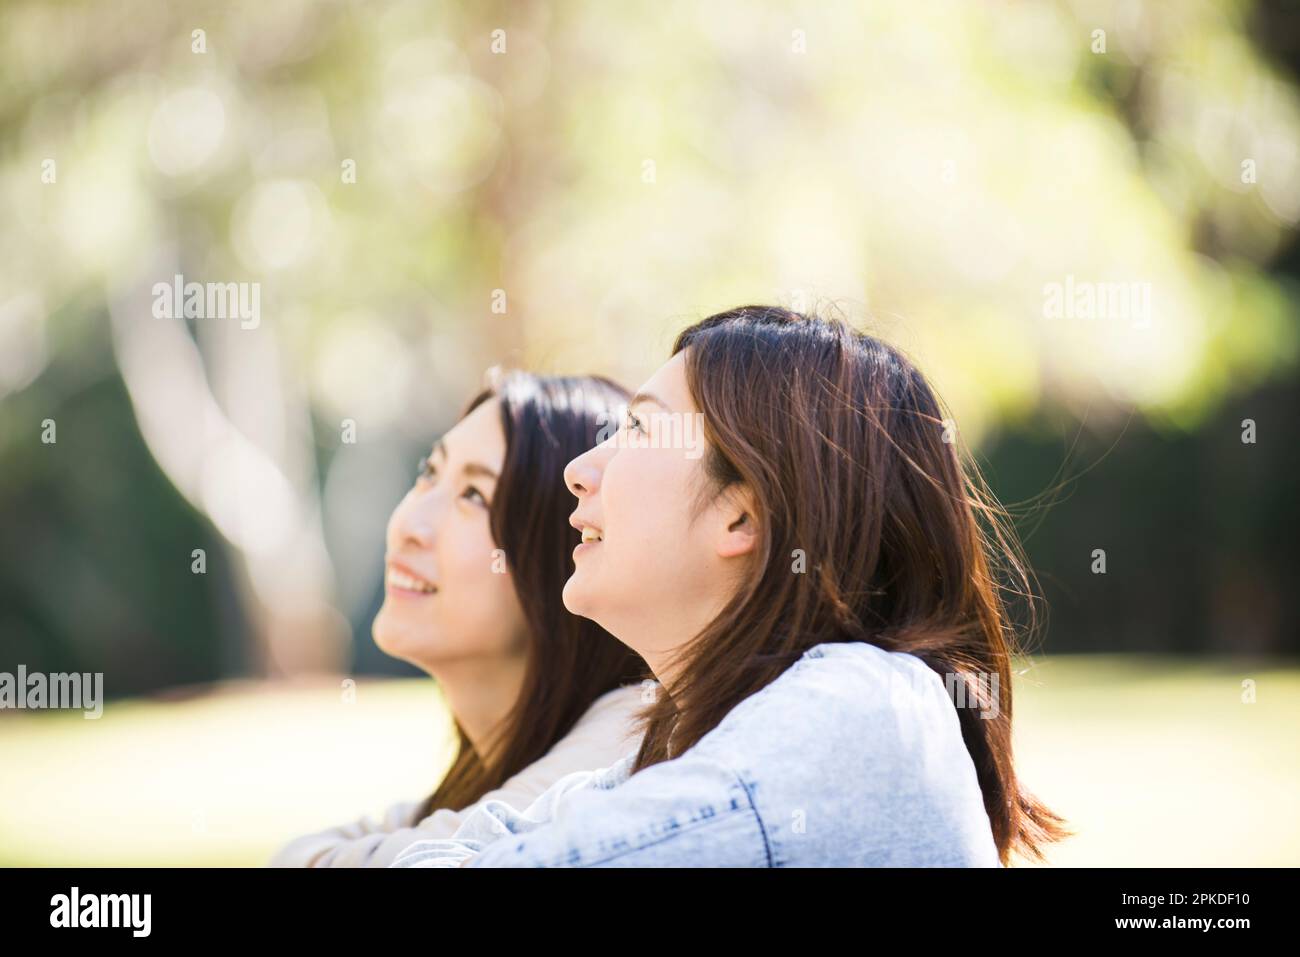 Two women looking up at the sky in green Stock Photo